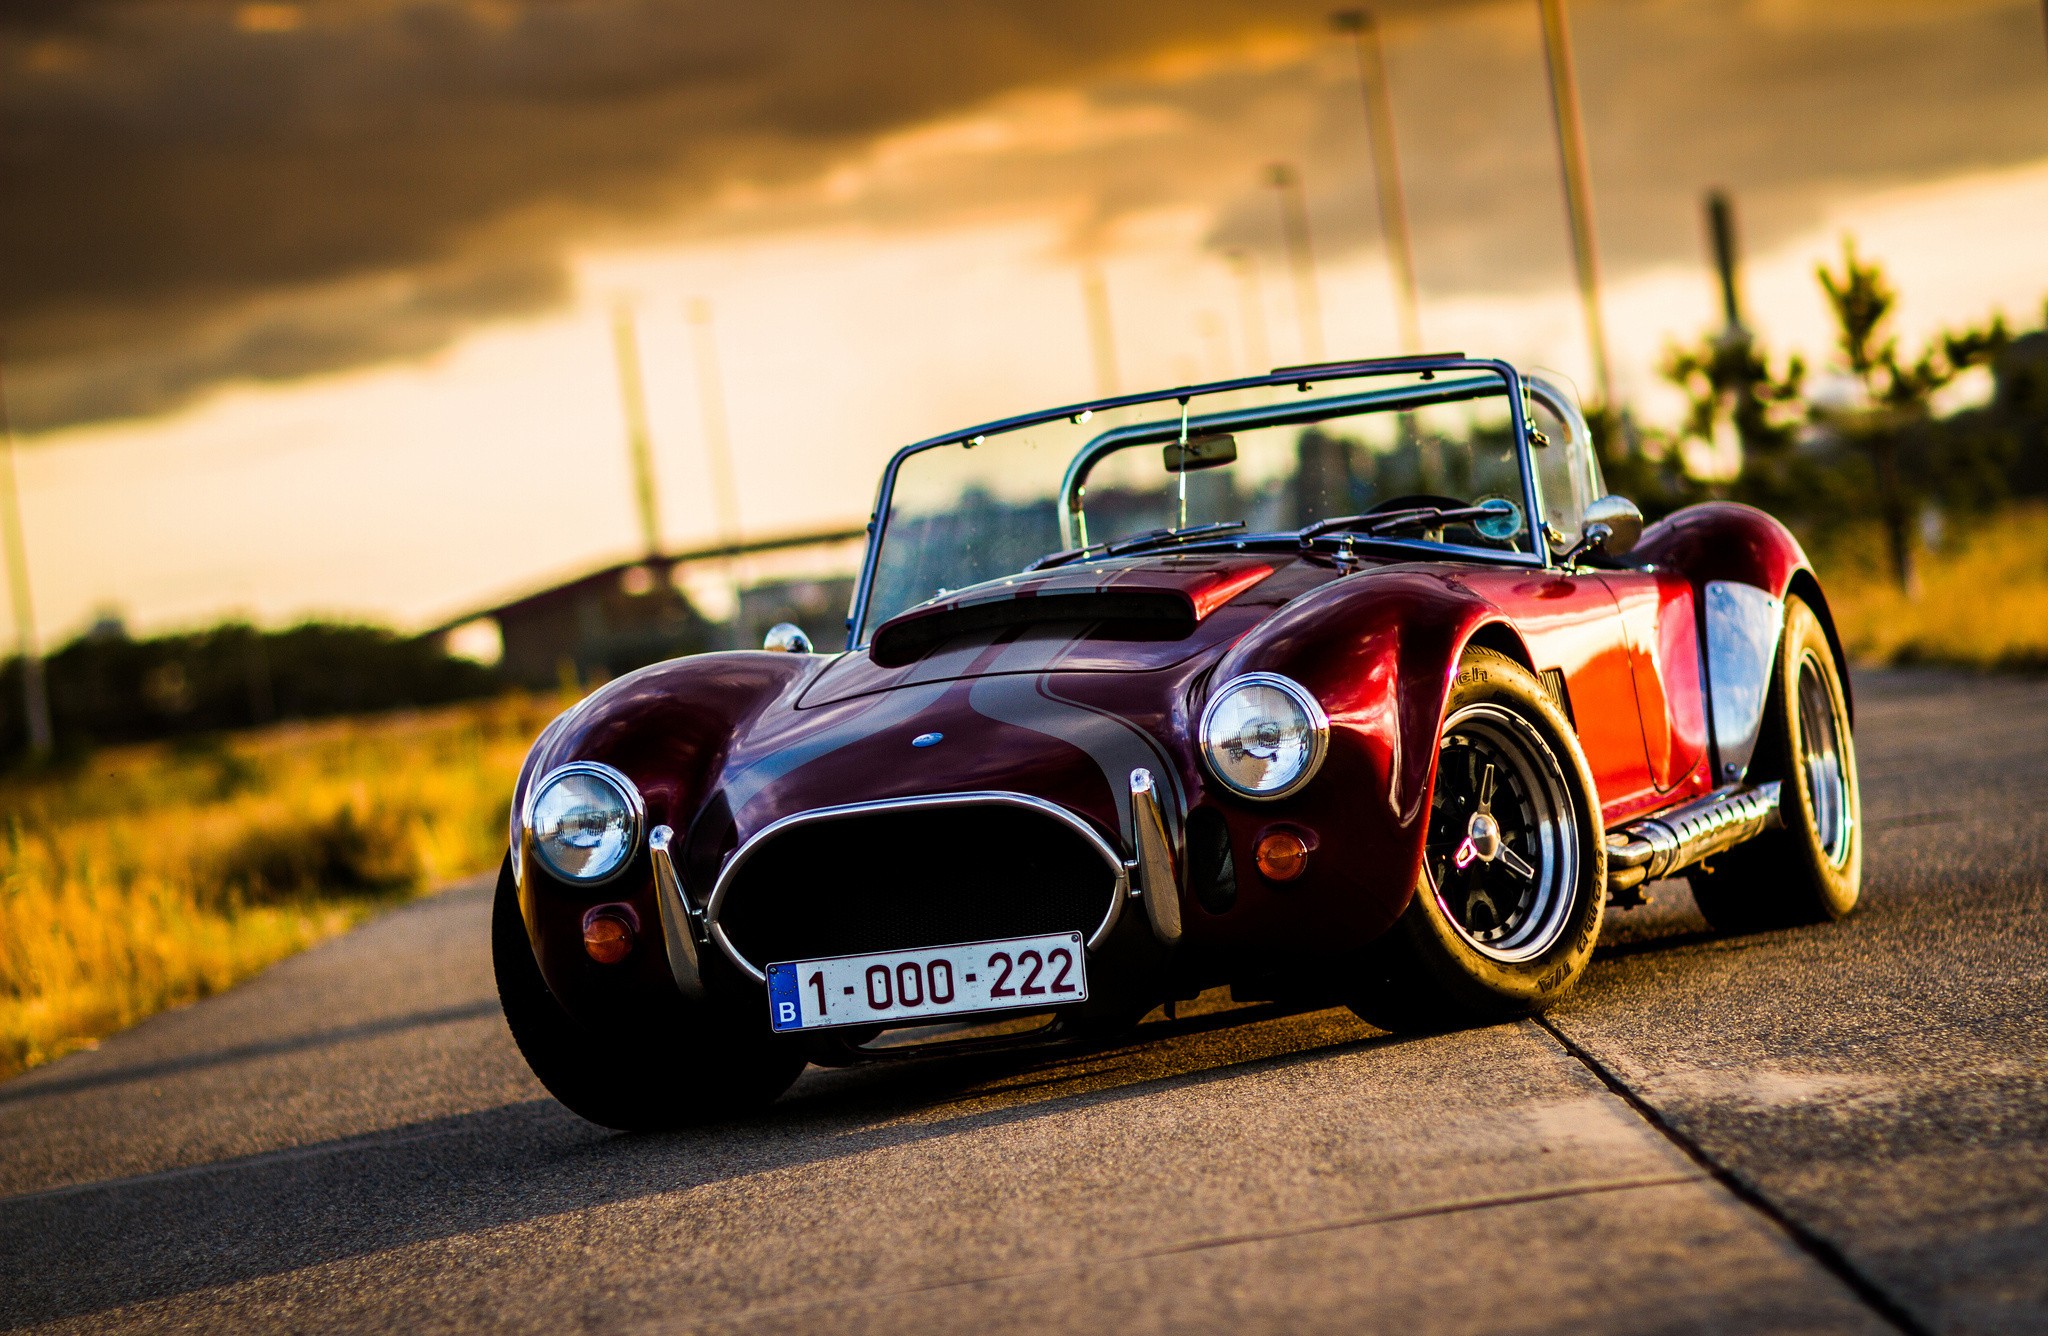 Shelby Car Convertible Sunlight Shadow Shelby Cobra Red Cars 2048x1336